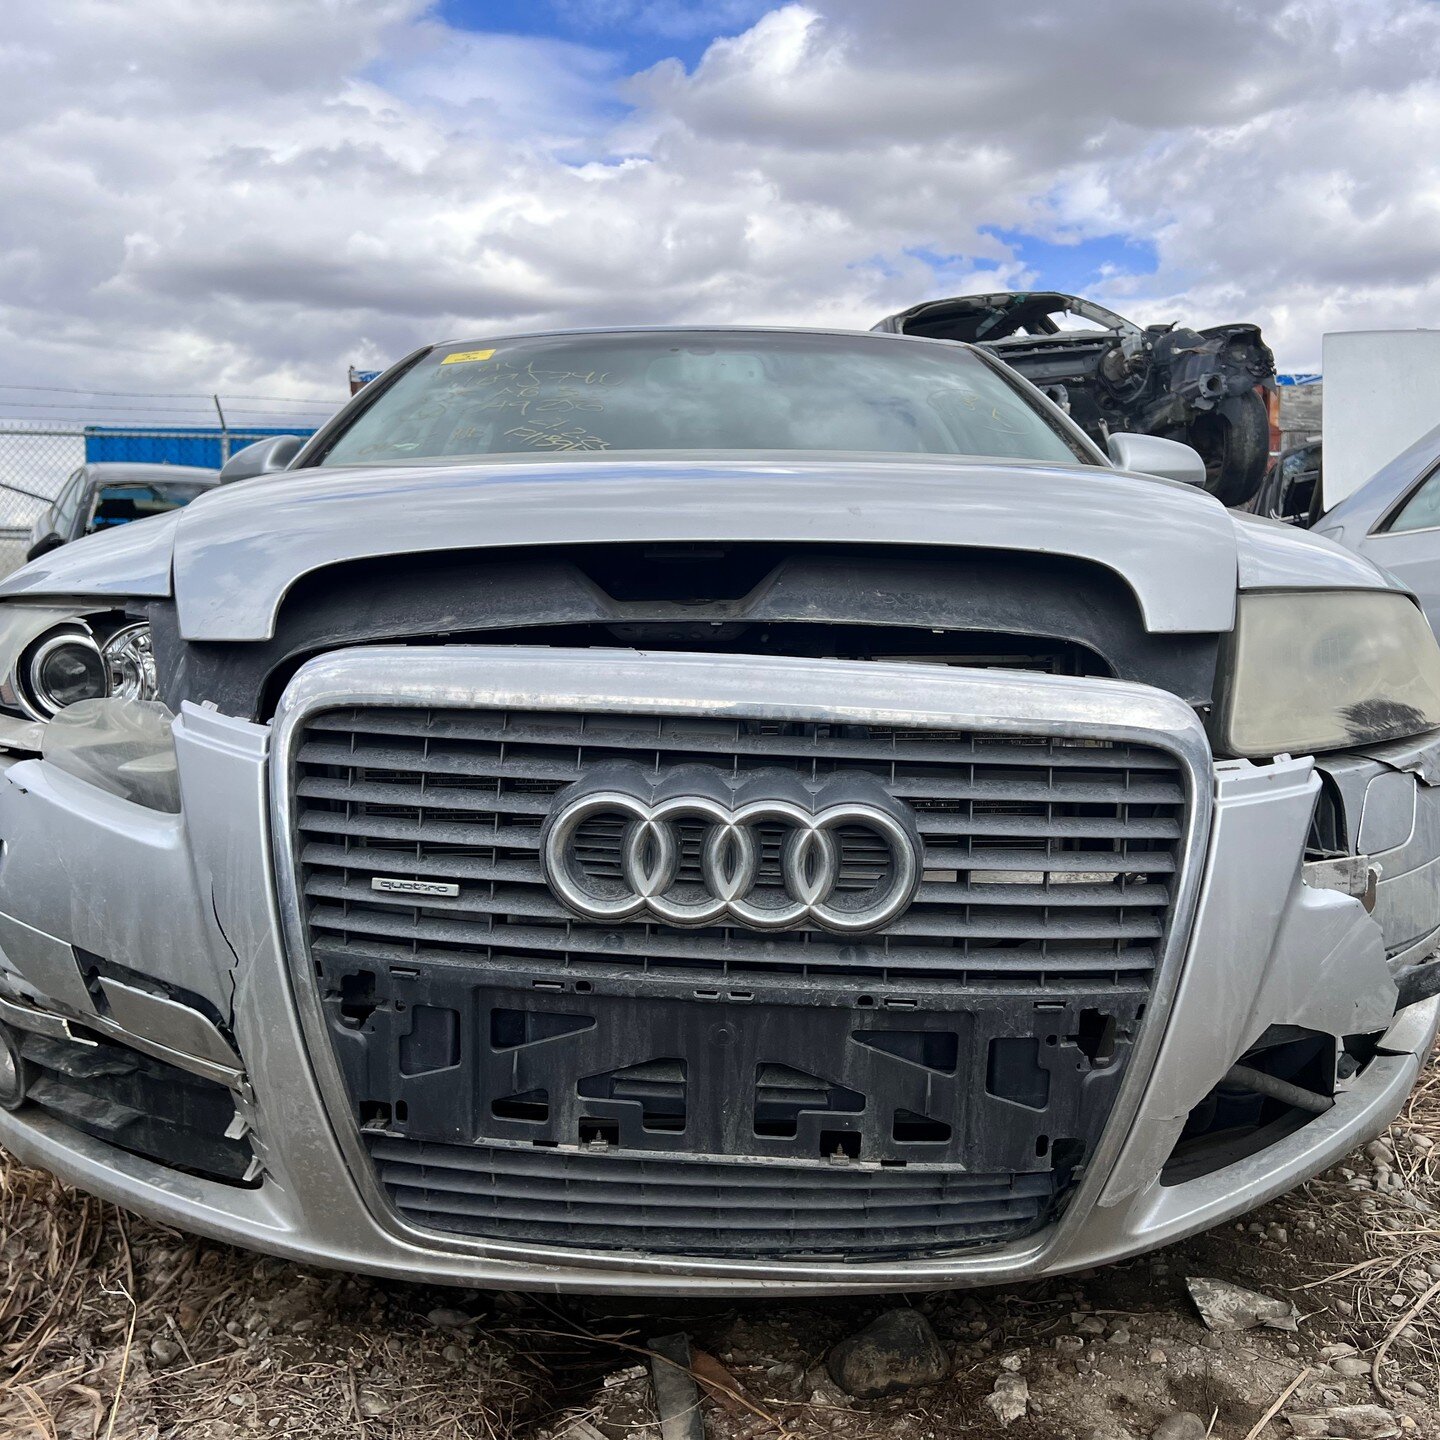 2005 AUDI A6 QUATTRO 3.2L *FOR PARTS* - 4WD, AUTOMATIC TIPTRONIC TRANSMISSION, 6 CYLINDER , SILVER(LY7W), KMS:171138, VIN:WAUDT74F45N049256

We offer contactless delivery and are more than willing to accommodate your needs.
Why pick your part when we